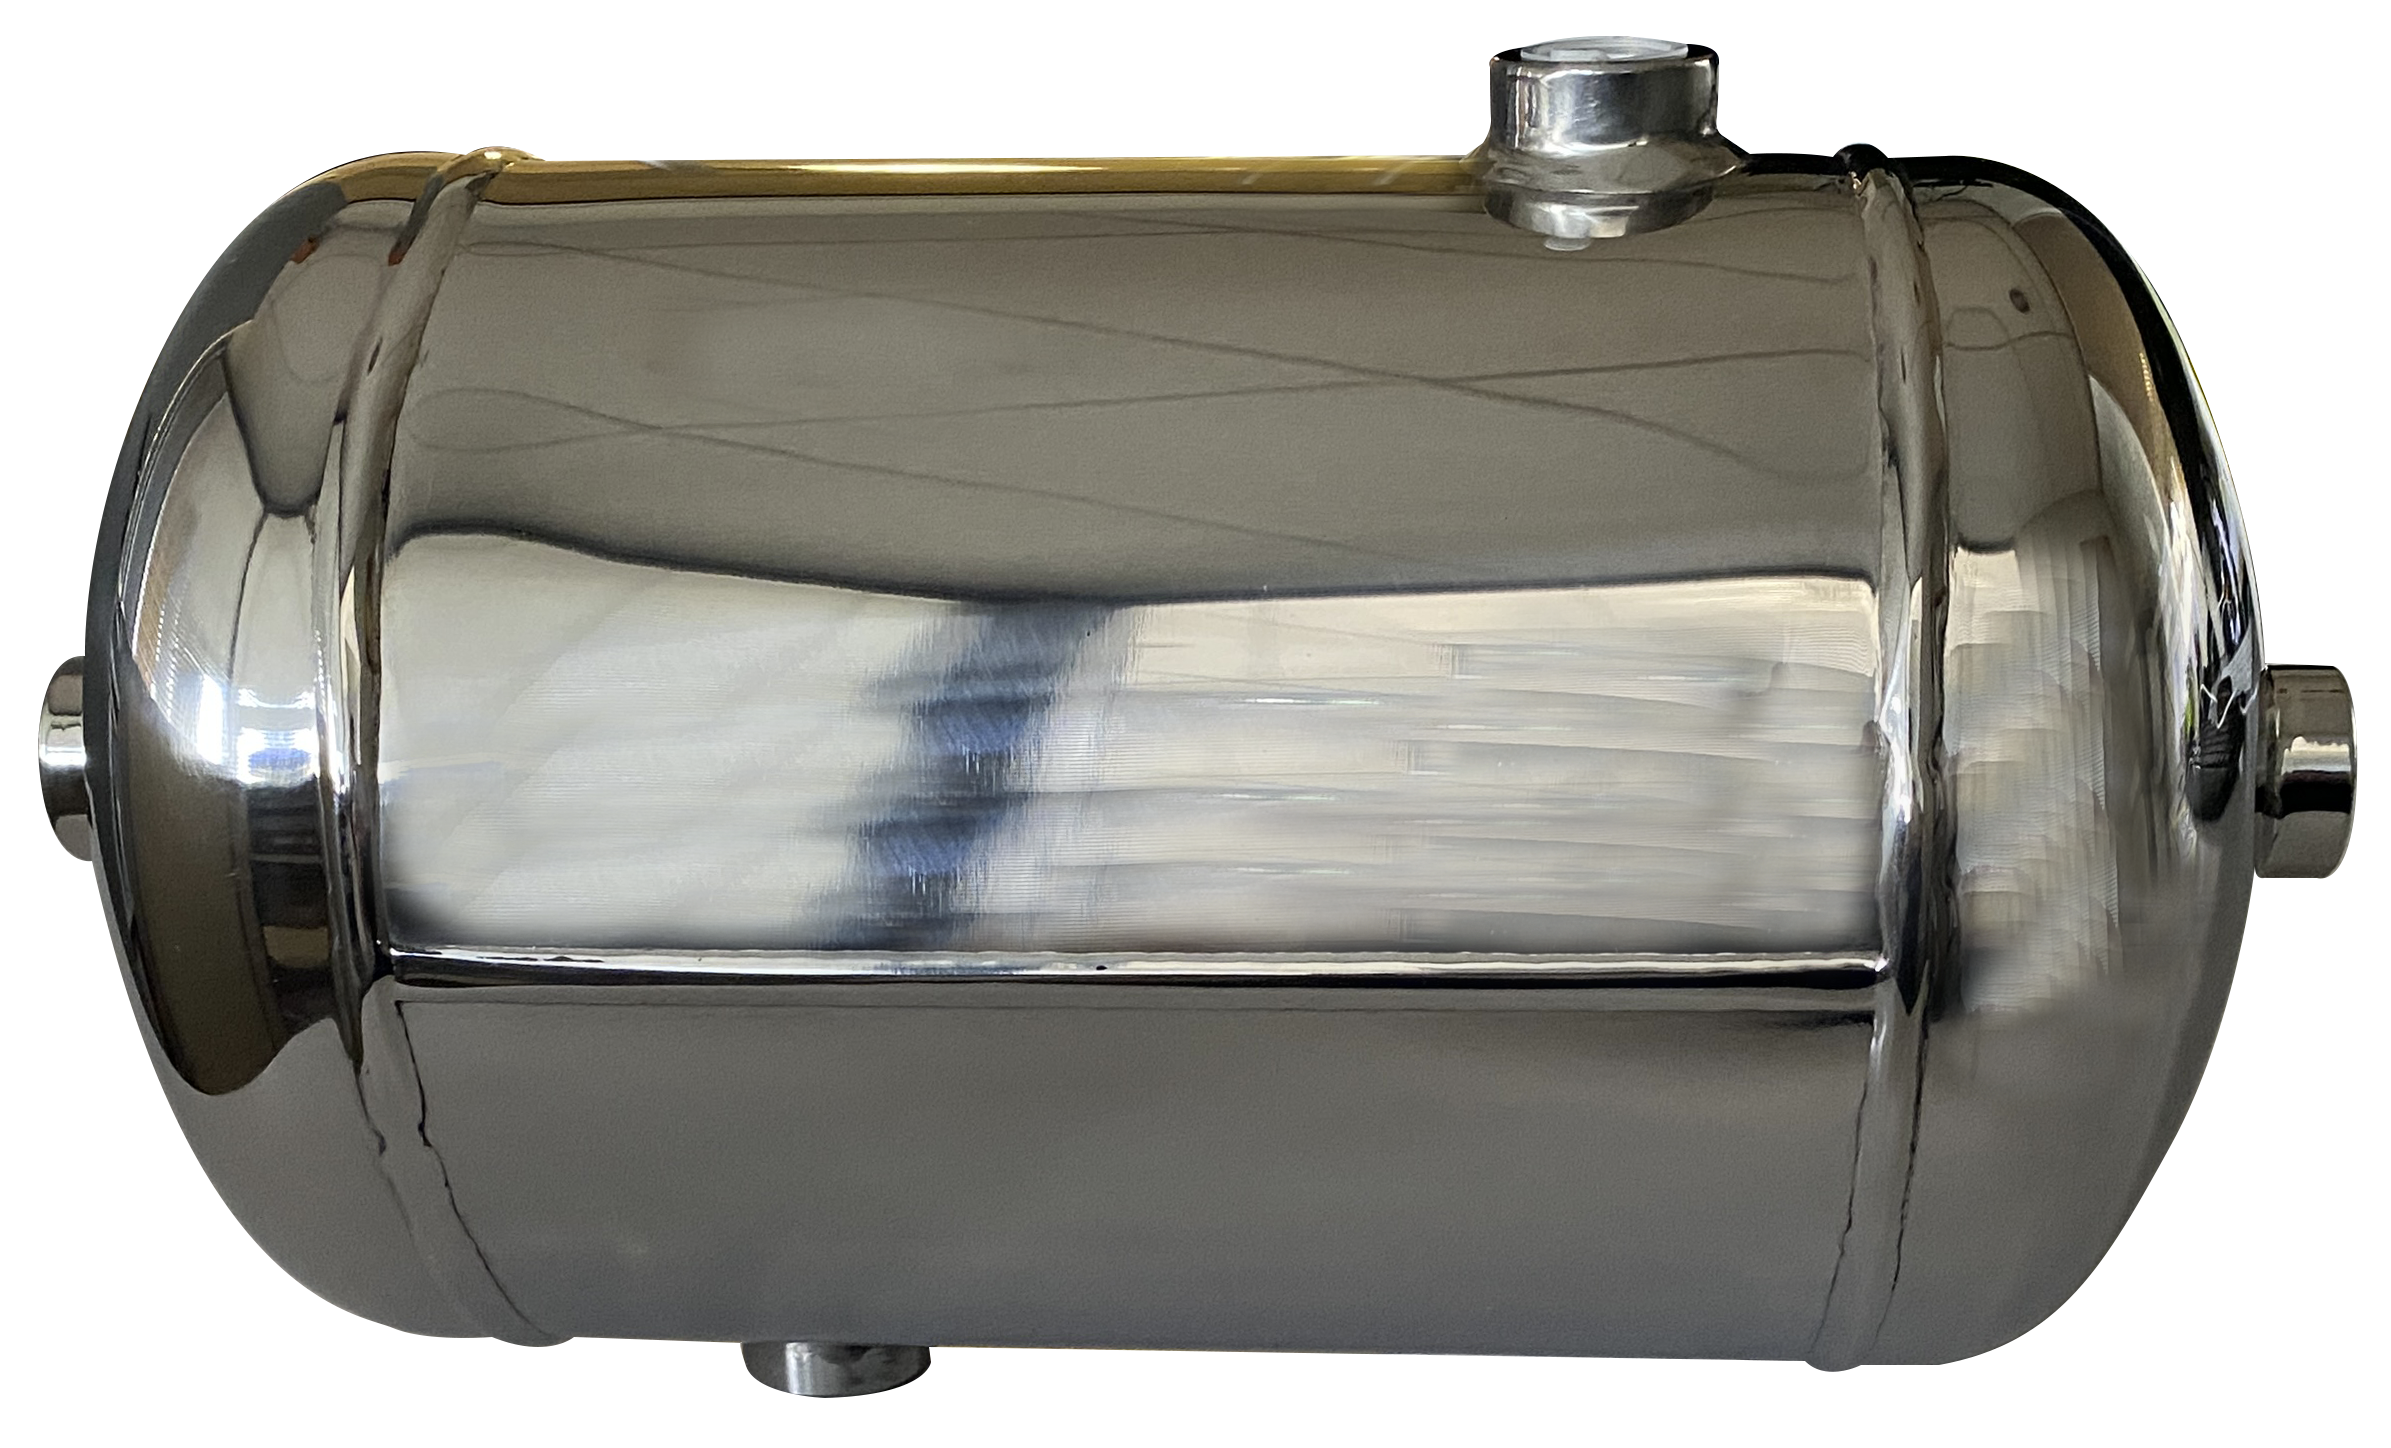 Compressed air tanks in polished stainless steel with feet